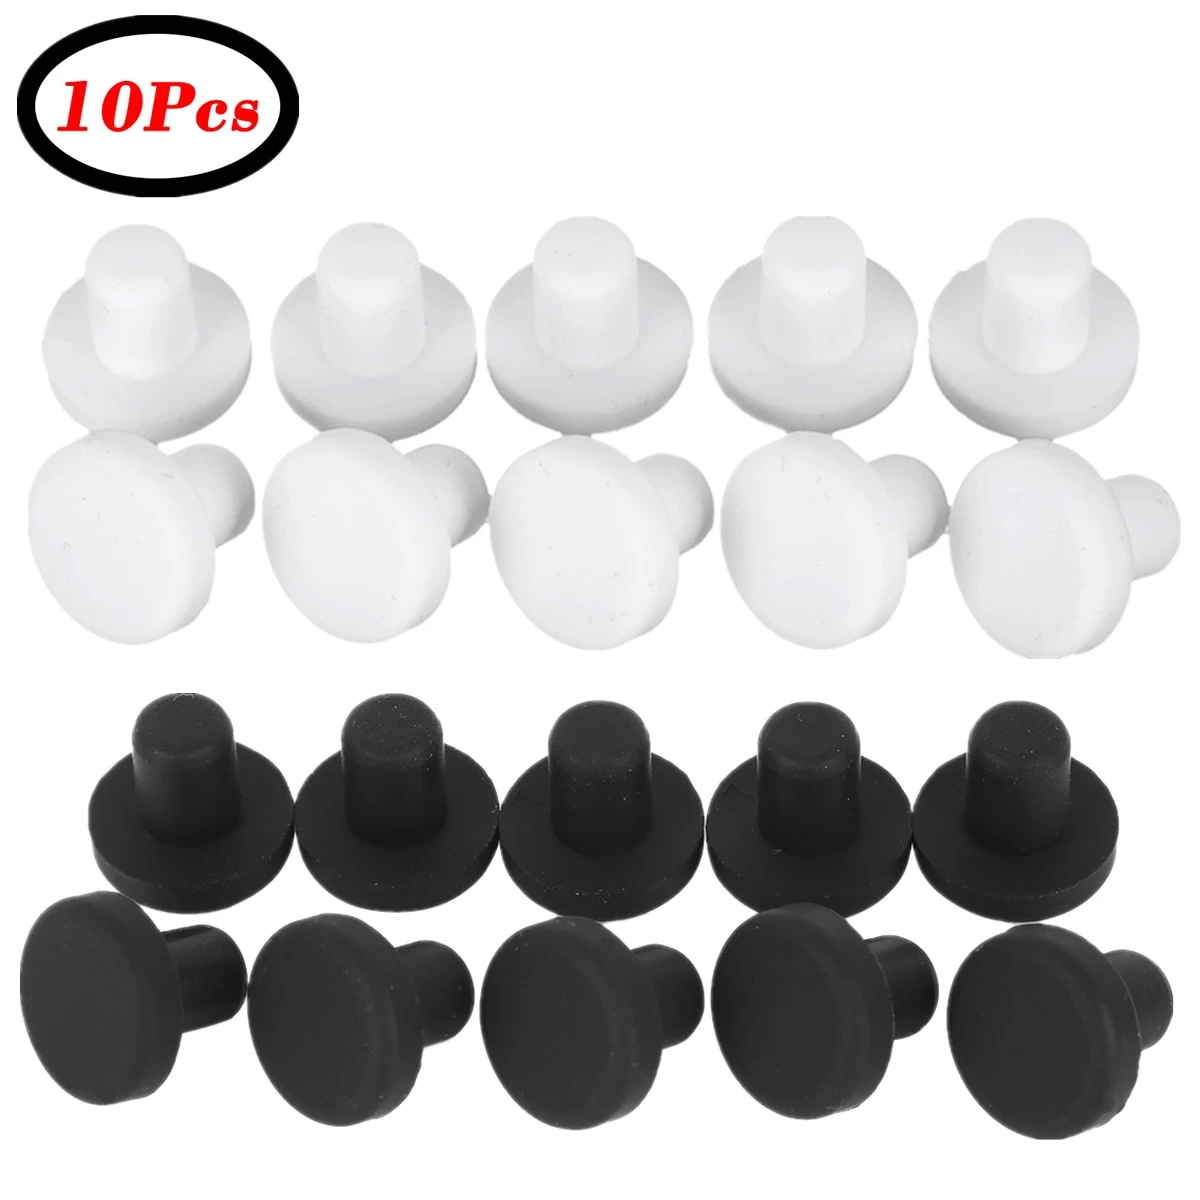 Rubber Male Hole caps Silicone T type Plug Stopper Black Round Tube End Caps 